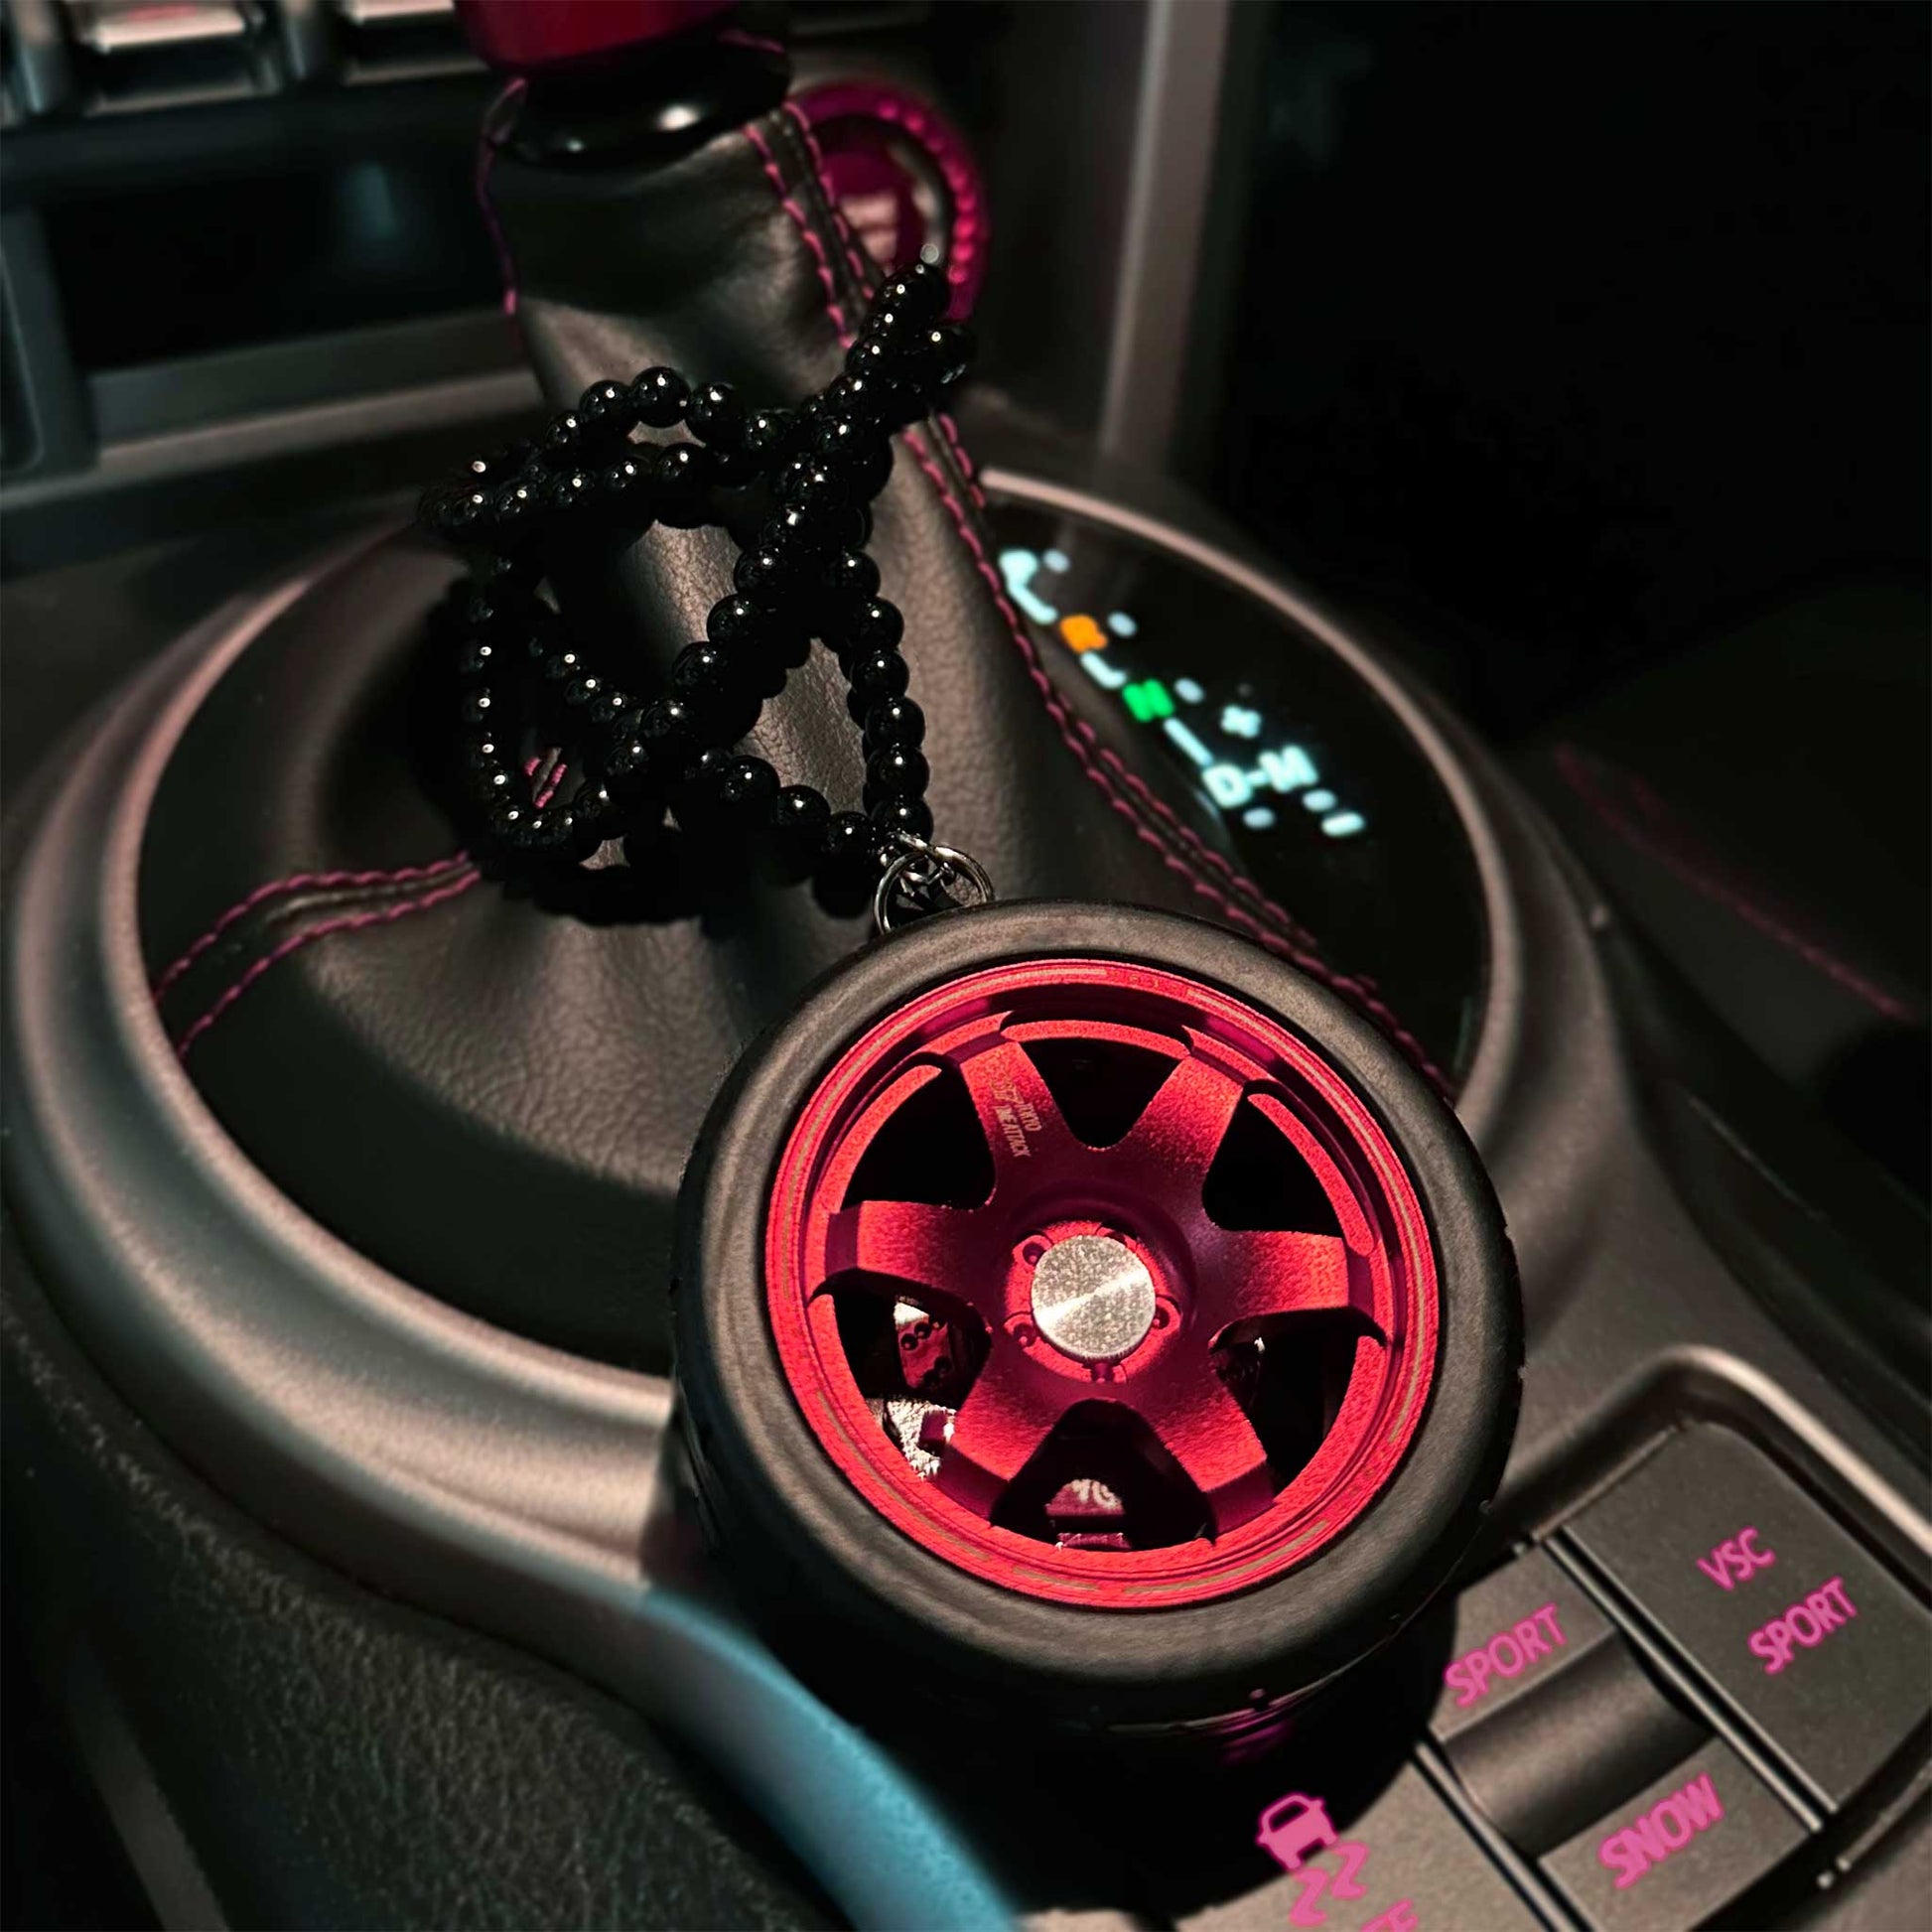 A red TE37 air-freshener is placed on an auto car's console with its beads twining around the car's shift boot